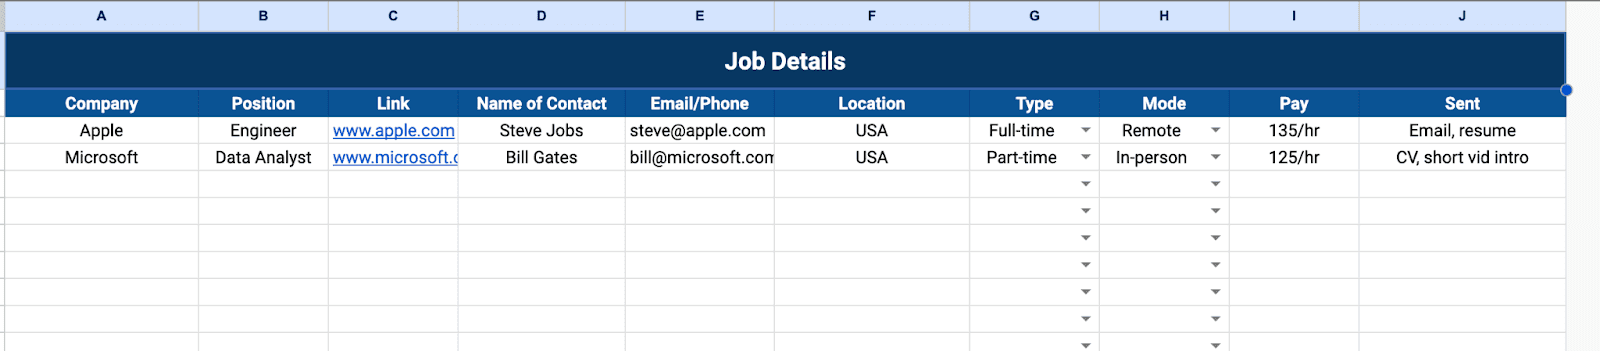 image of a spreadsheet